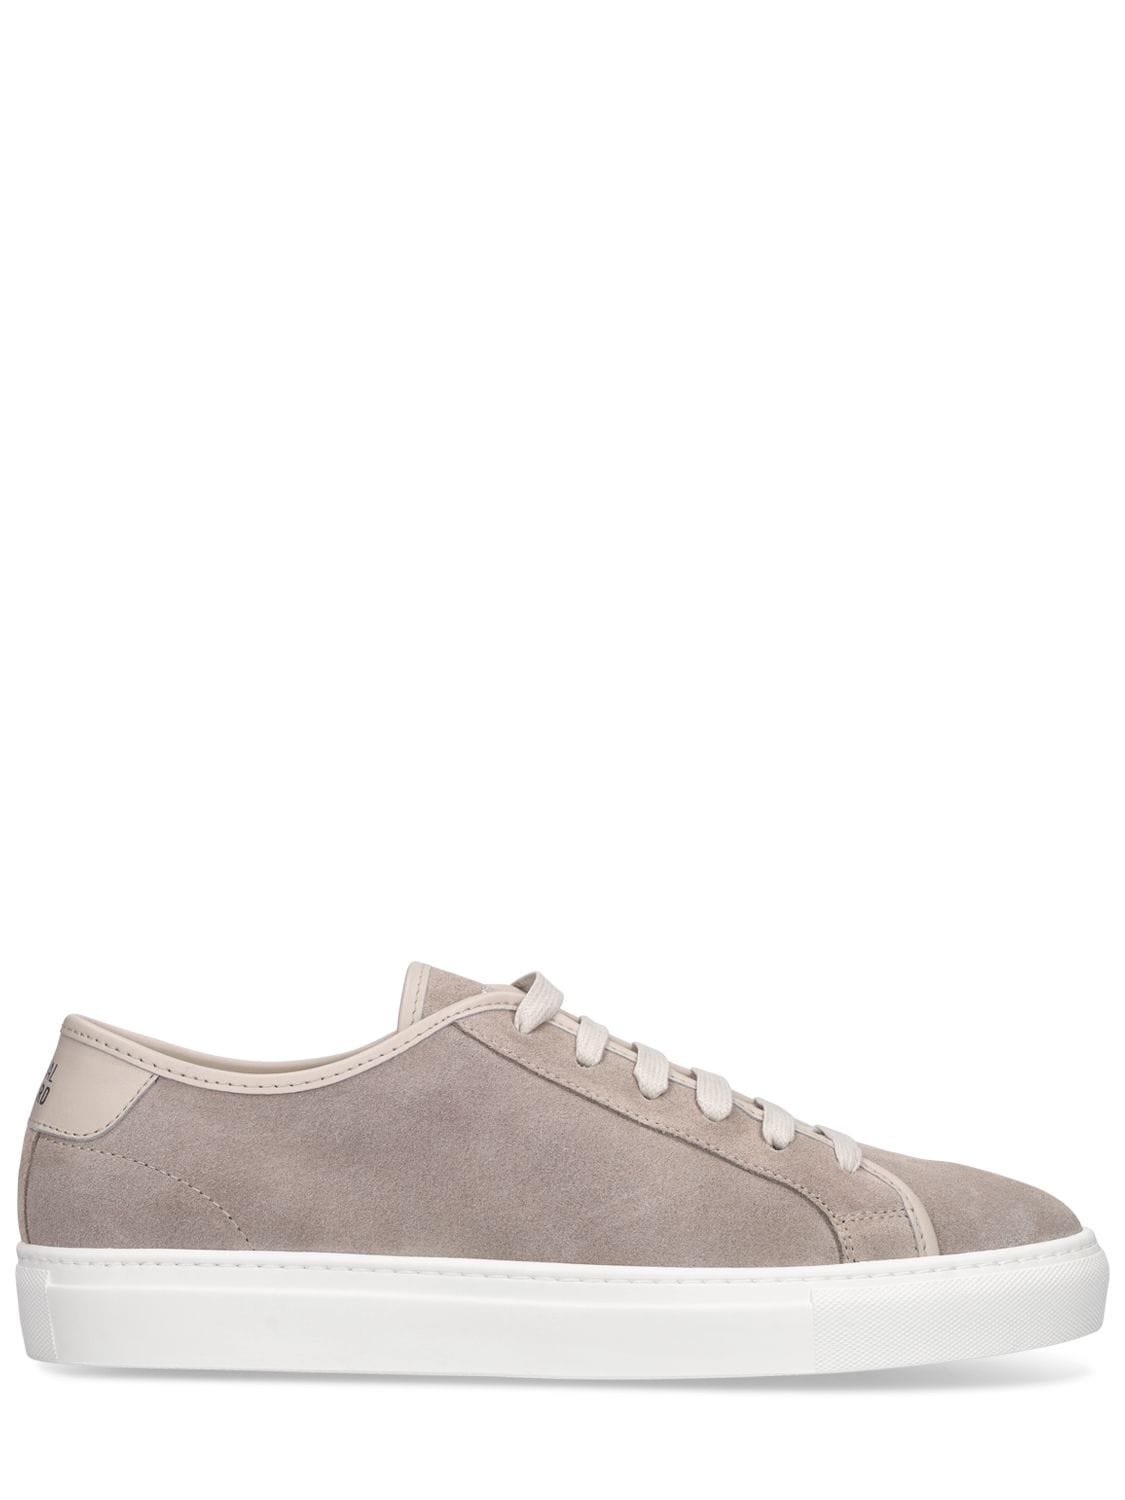 NATIONAL STANDARD Edition 3 Suede & Leather Sneakers